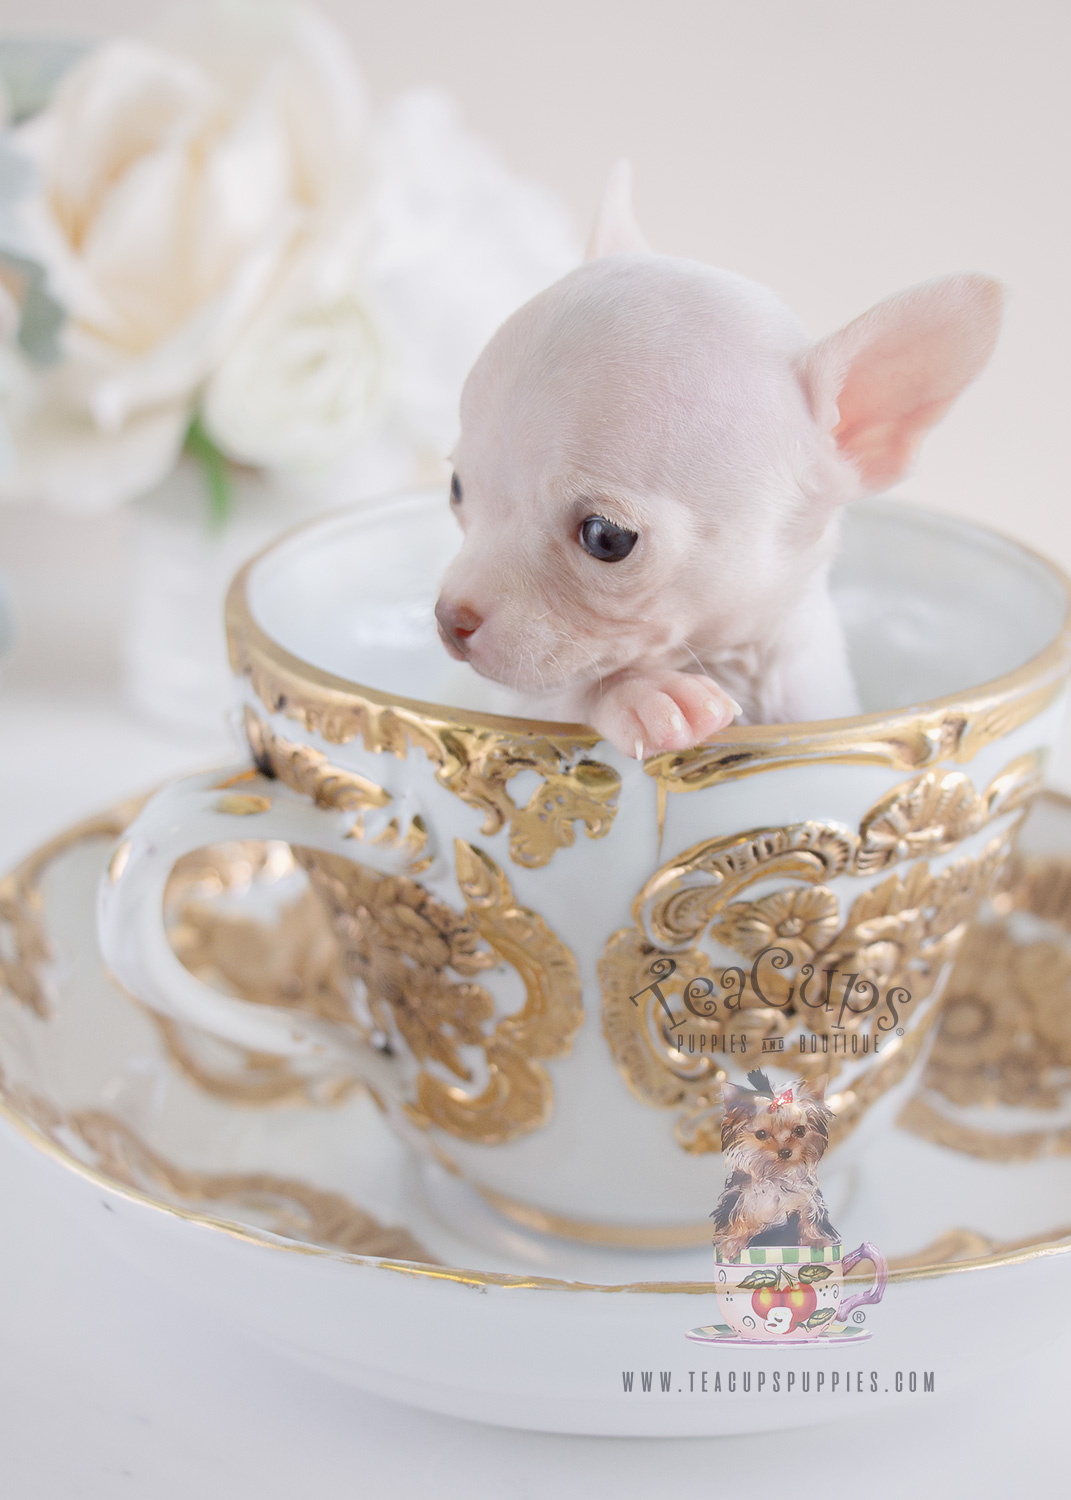 Chihuahua Puppy For Sale #068 Teacup Puppies Tiny Teacup